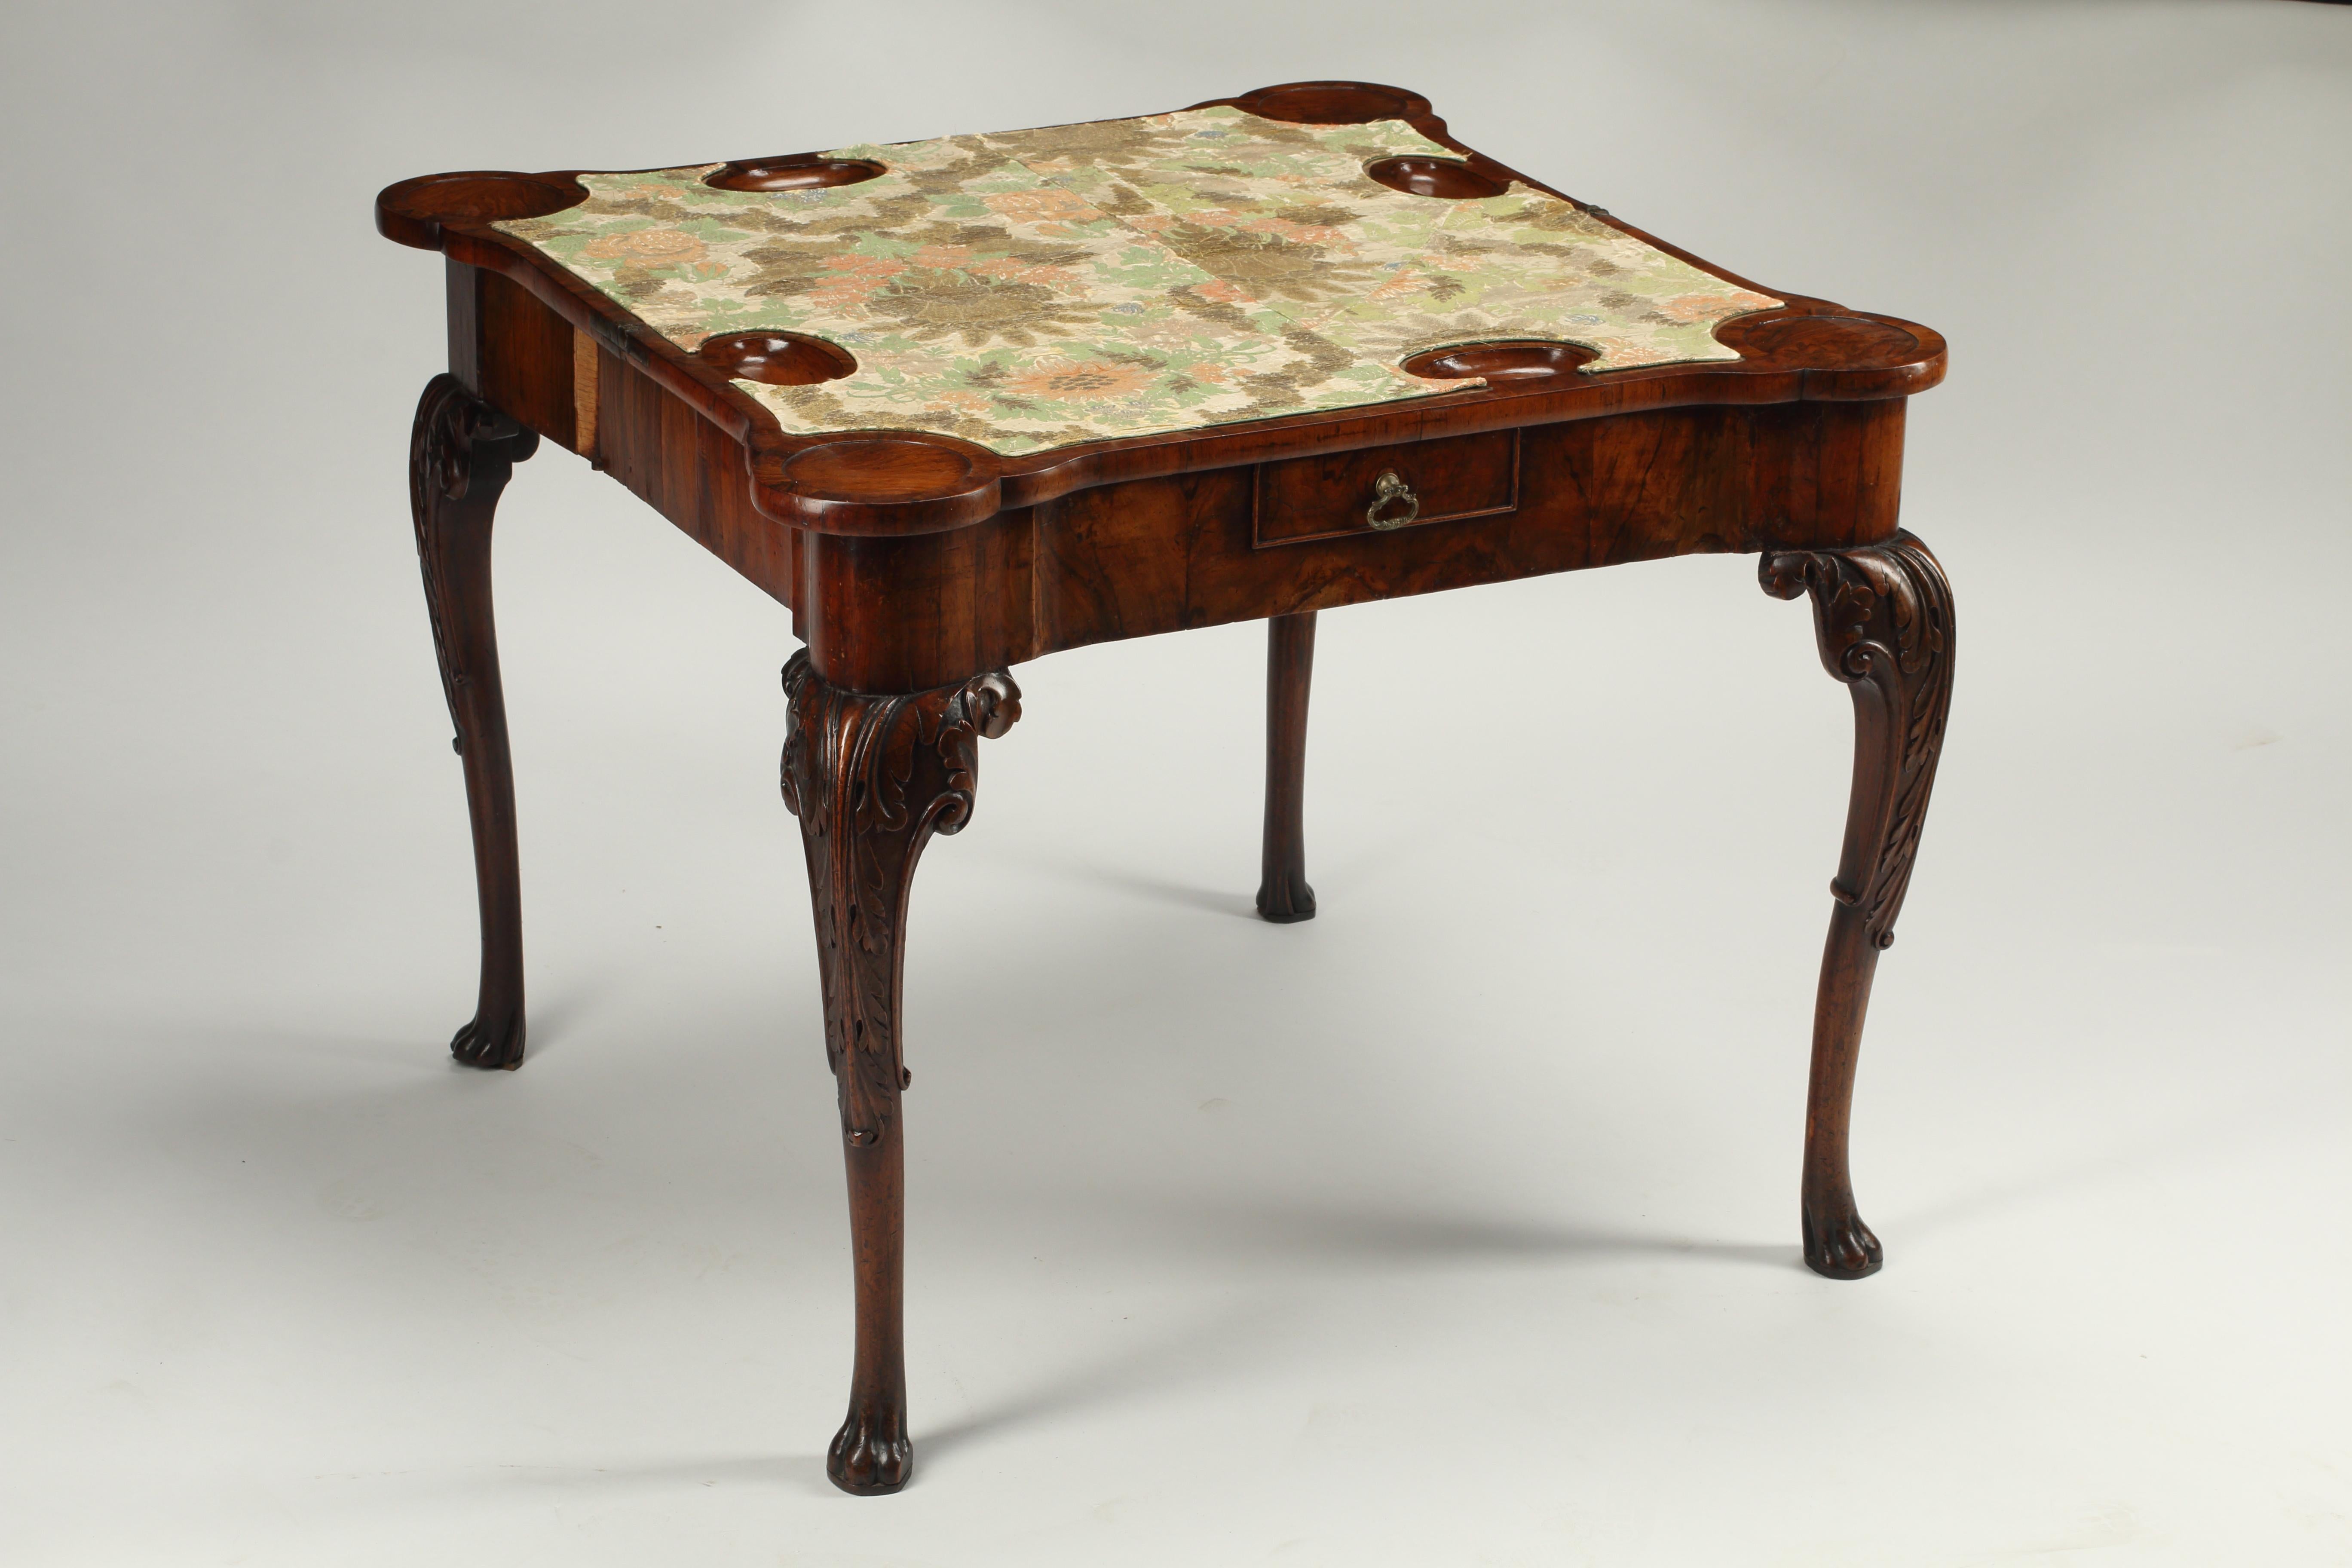 This Irish George II/III carved walnut concertina action fold over games table is a fine example of Irish furniture from the mid-18th century. Made of solid walnut with a carved top and cabriole legs. The top folds down to reveal a floral print